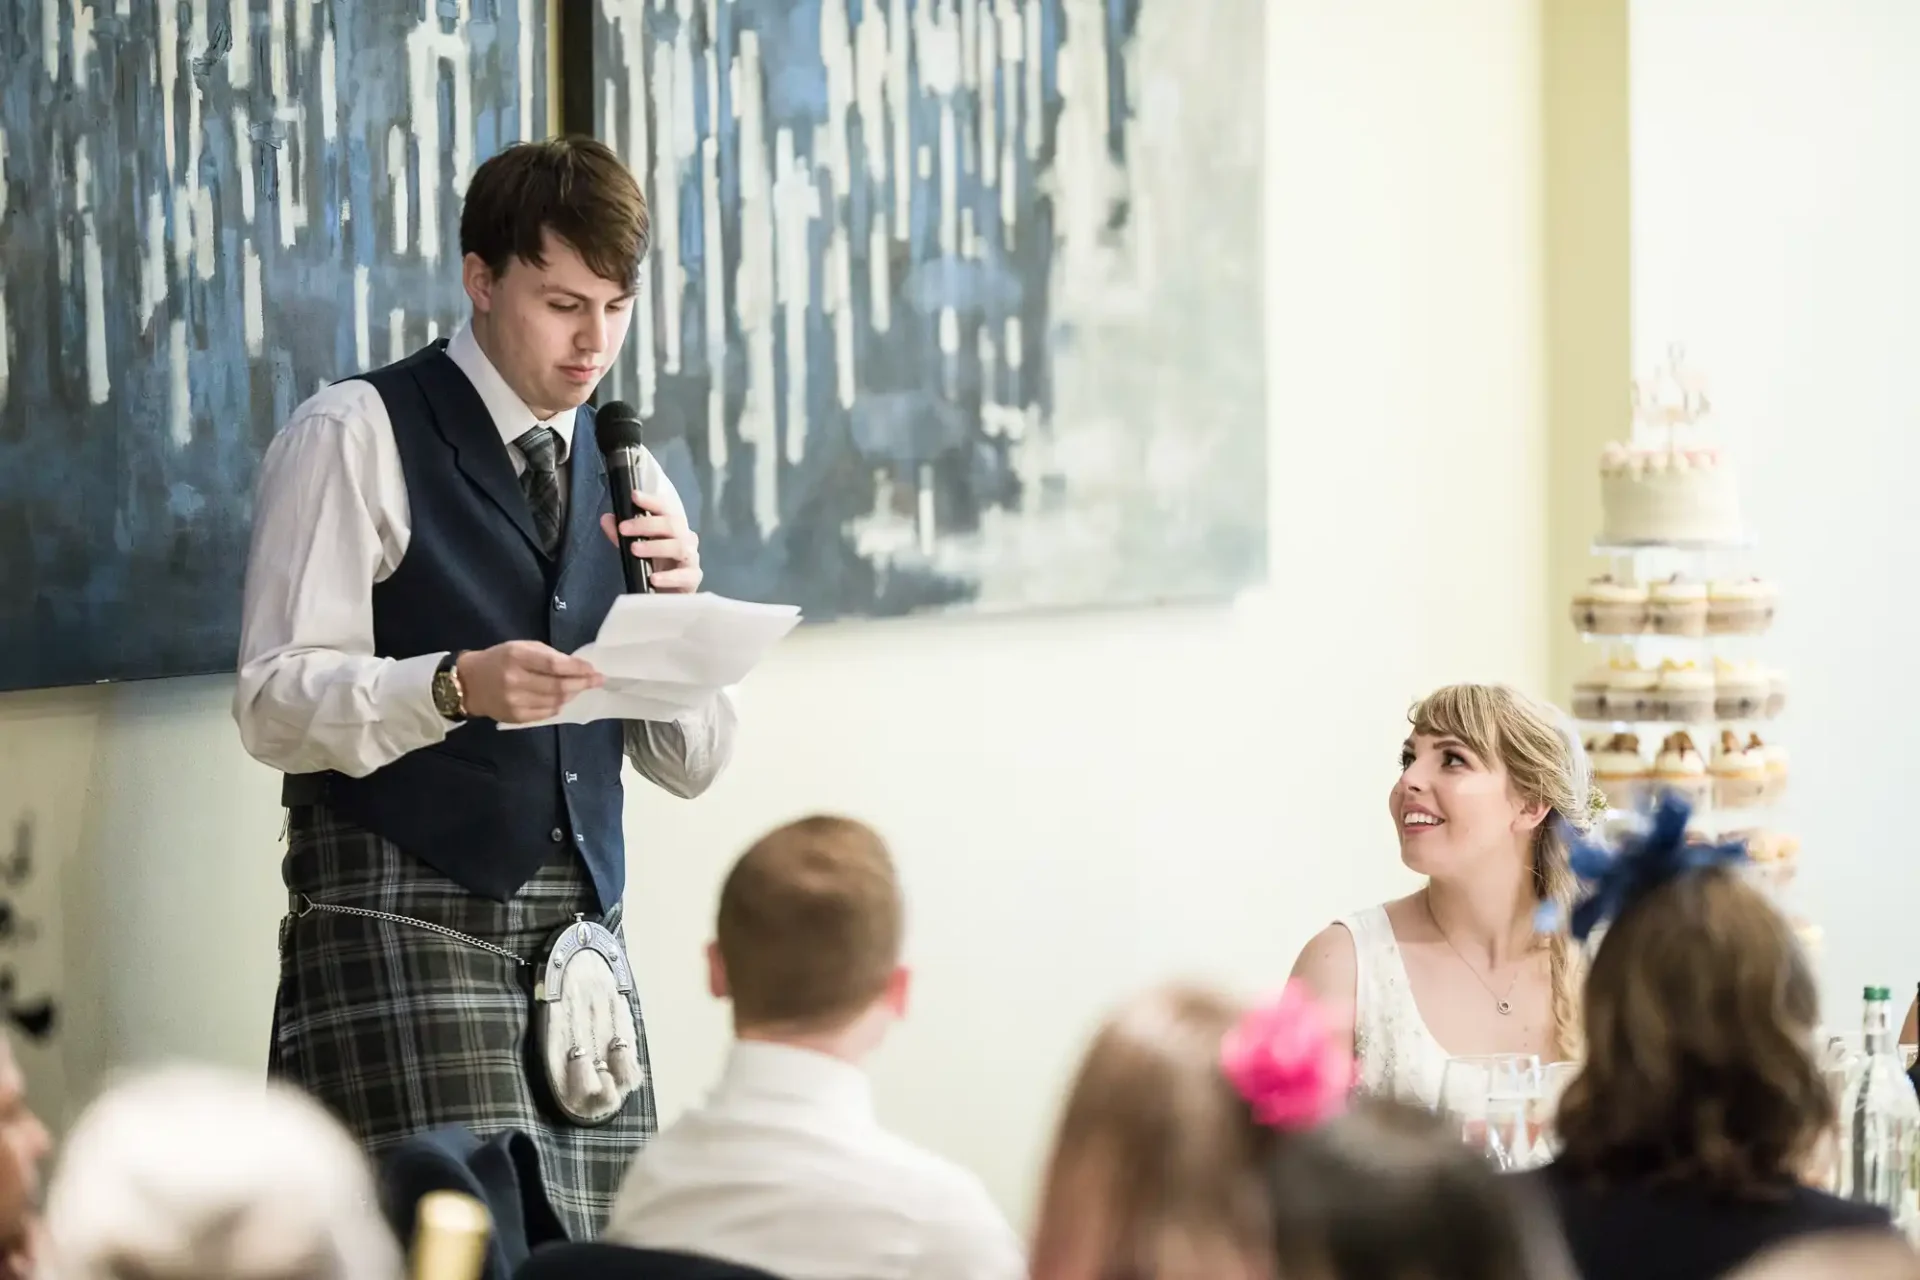 A man in a kilt and vest reads from a paper into a microphone at a wedding reception, with a smiling woman in a white dress listening nearby. a tiered cake stands in the background.